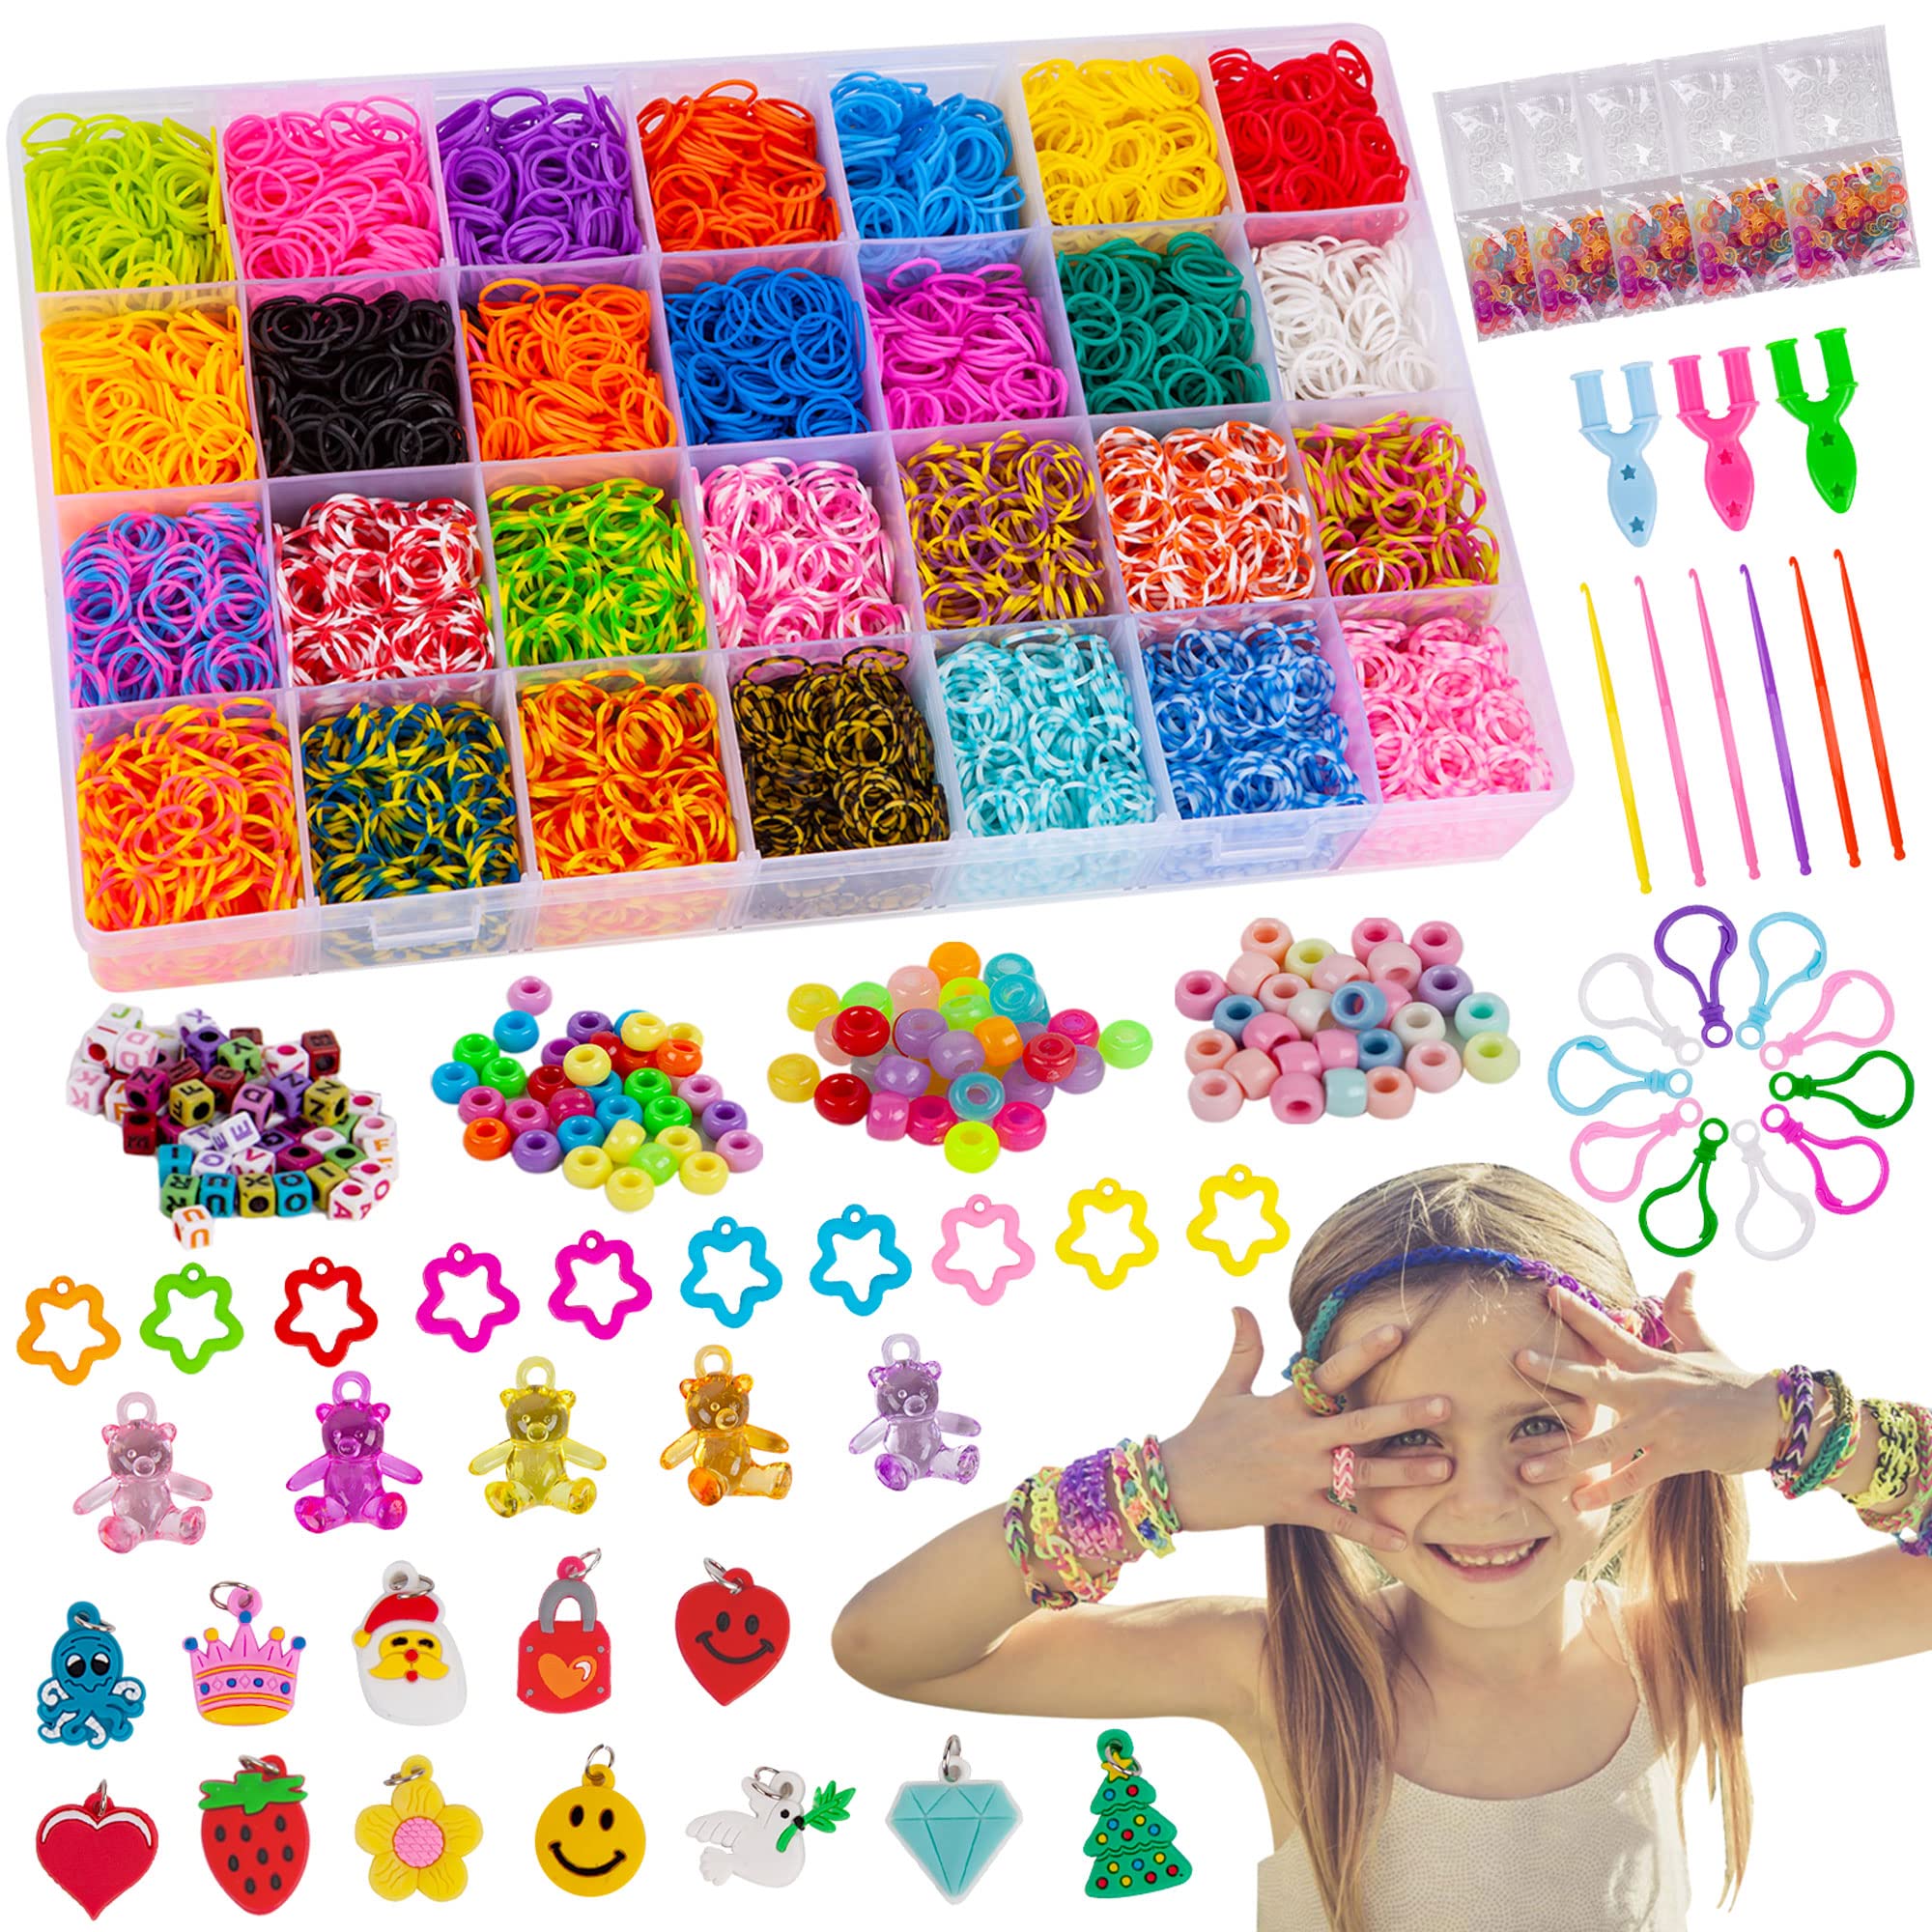 Rubber Band Bracelet Kit in 1 Set Rainbow Loom Refill Bracelet kit, Loom  Bands Kit, Bracelet Making Kit Rubber Band for Adults Weaving DIY Crafting  Birthday and Christmas Gift